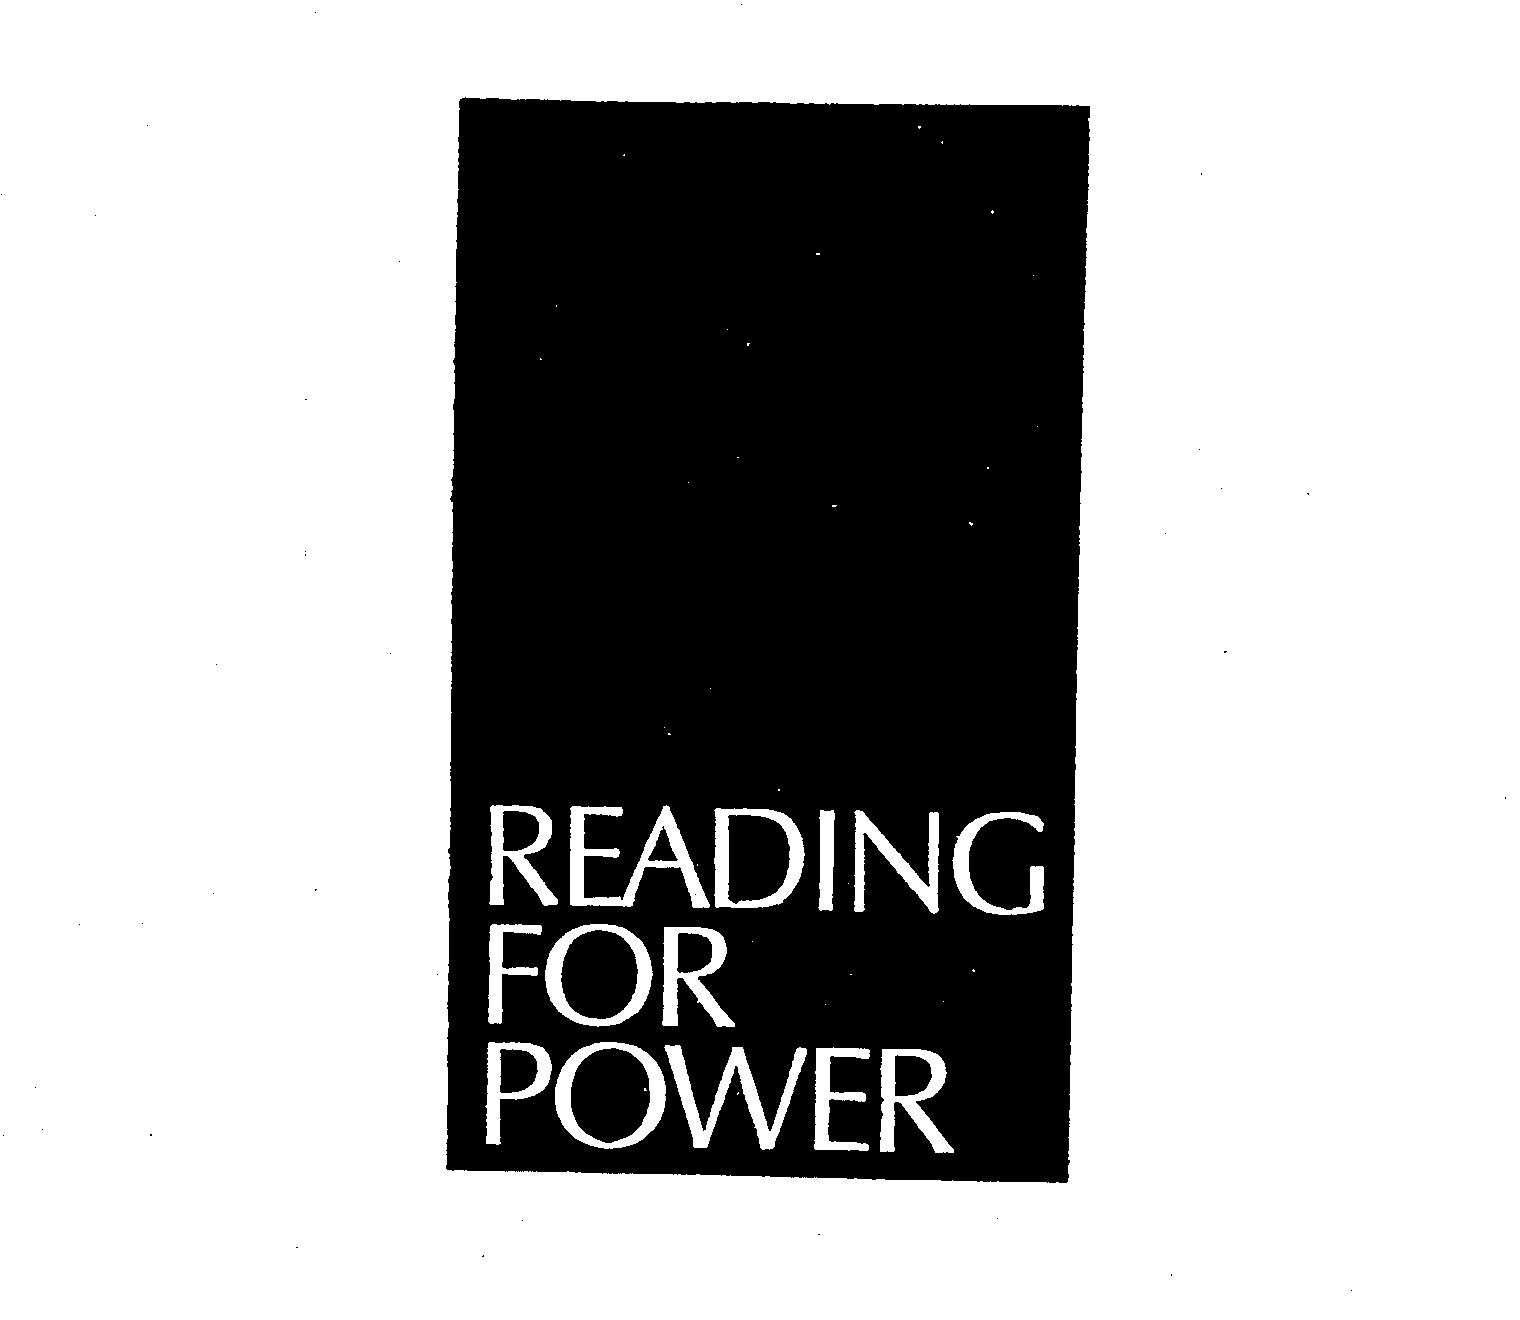  READING FOR POWER